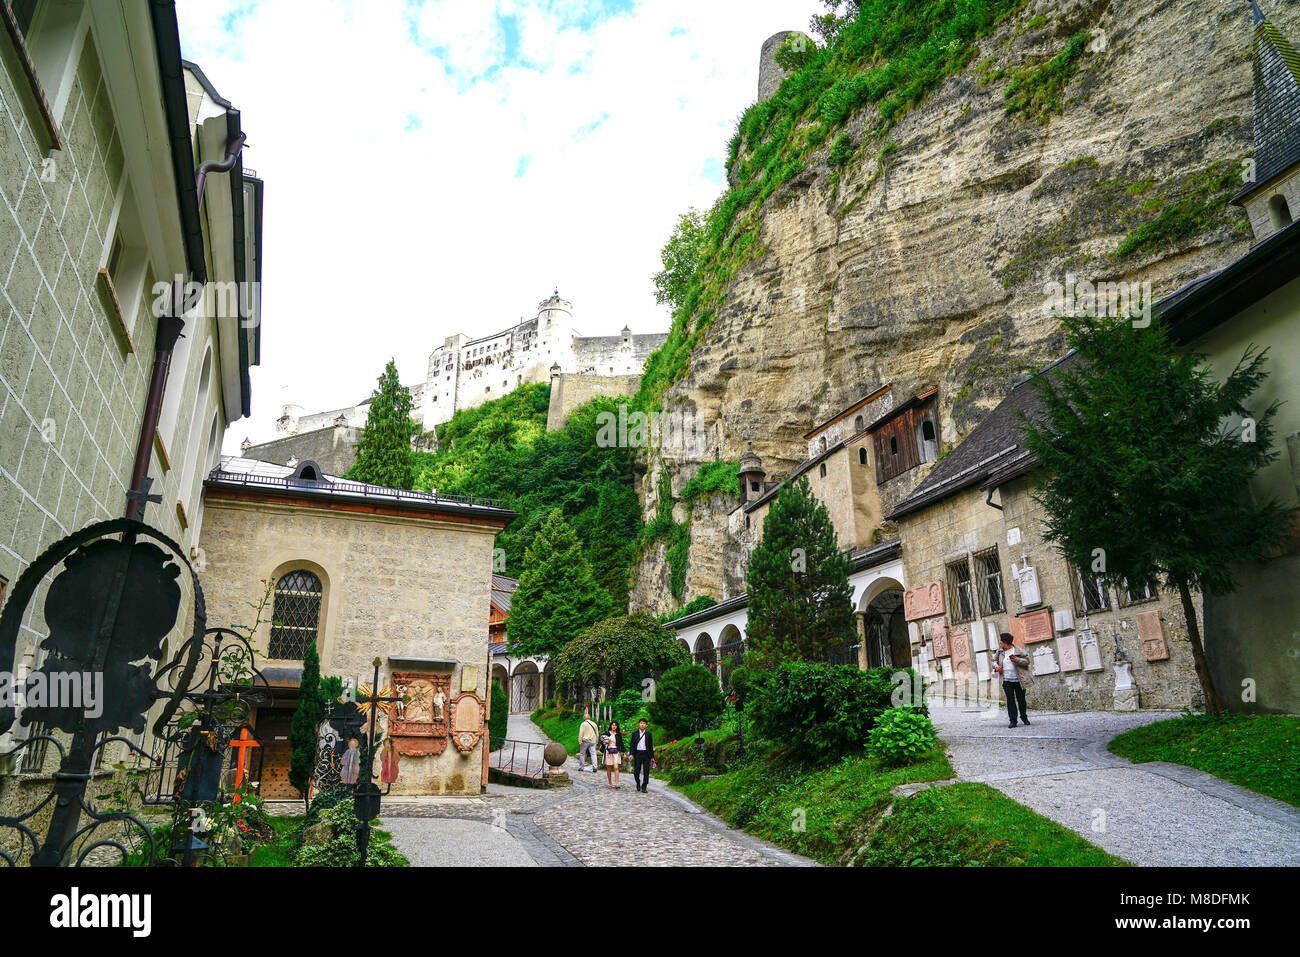 SALZBURG< AUSTRIA - SEPTEMBER 6 2017; Tourists on converging paths between luxuriant cemetery gardens and graves and St. Peter's church  with  Hohensa Stock Photo